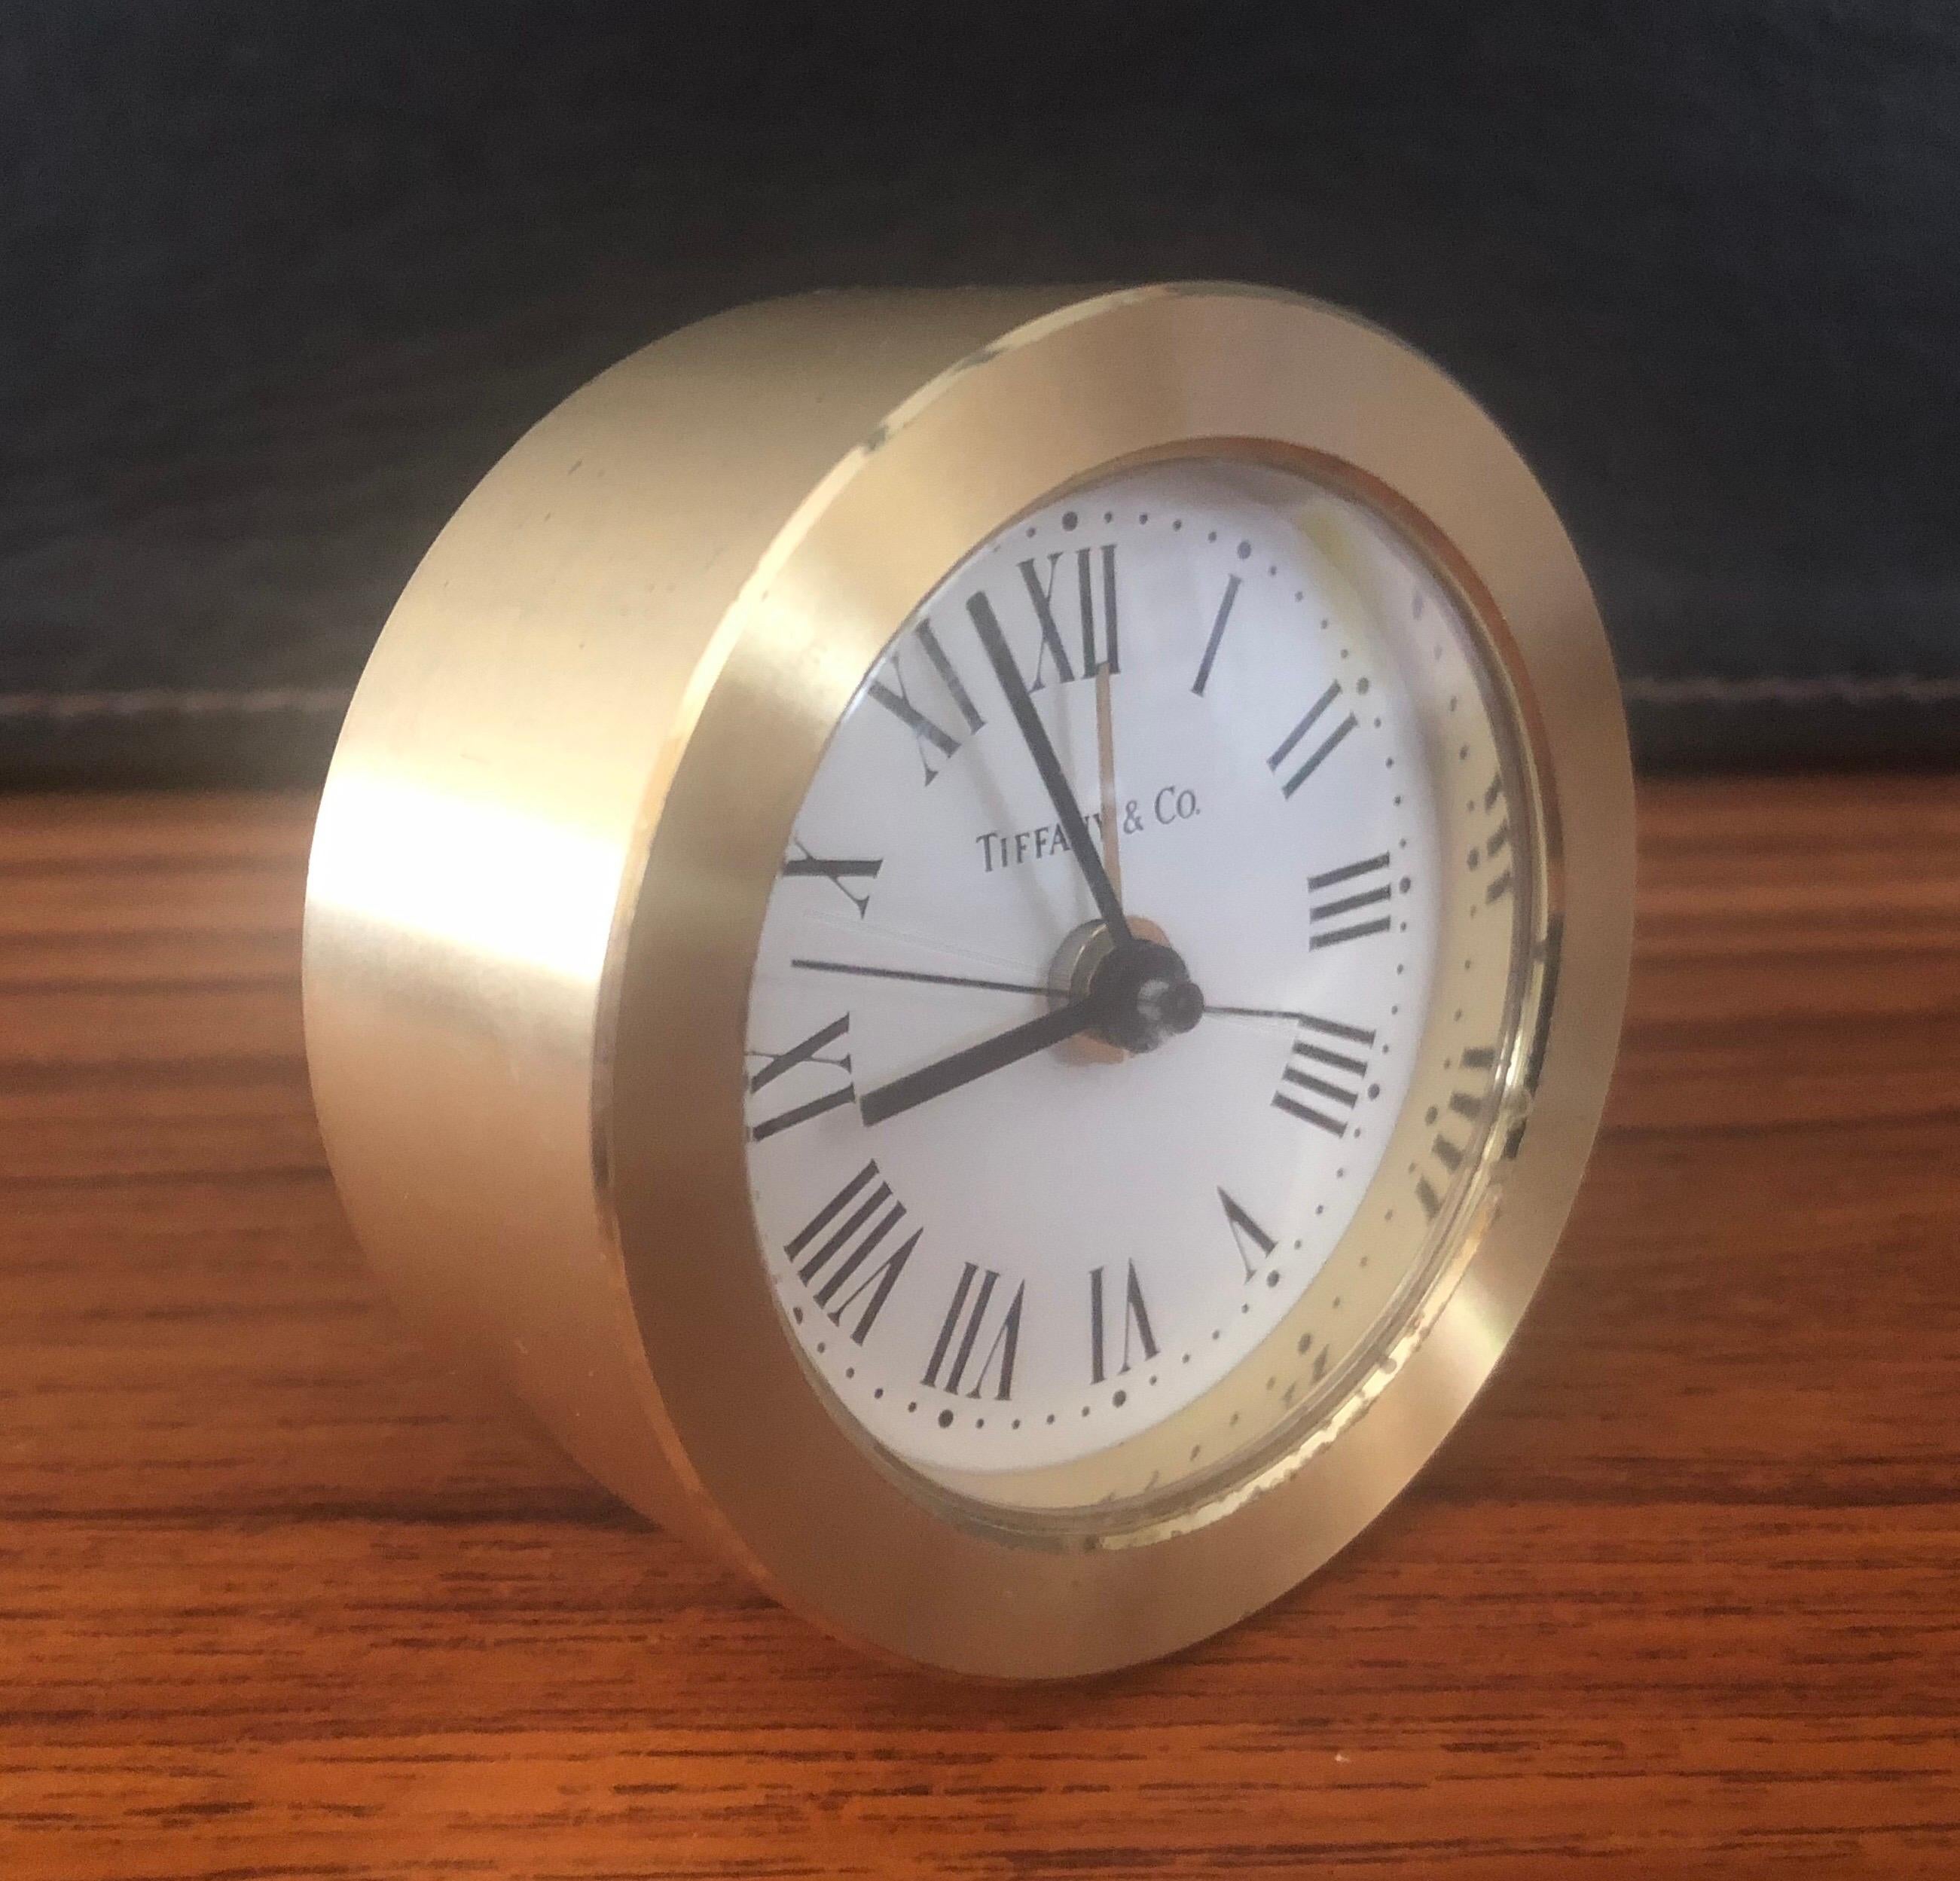 A very nice round brass desk alarm clock by Tiffany & Co., circa 1980s. The clock has a quartz movement and is made in Germany; the case is made of brushed brass and has formed Roman numeral for hour markers. The piece features a white dial with